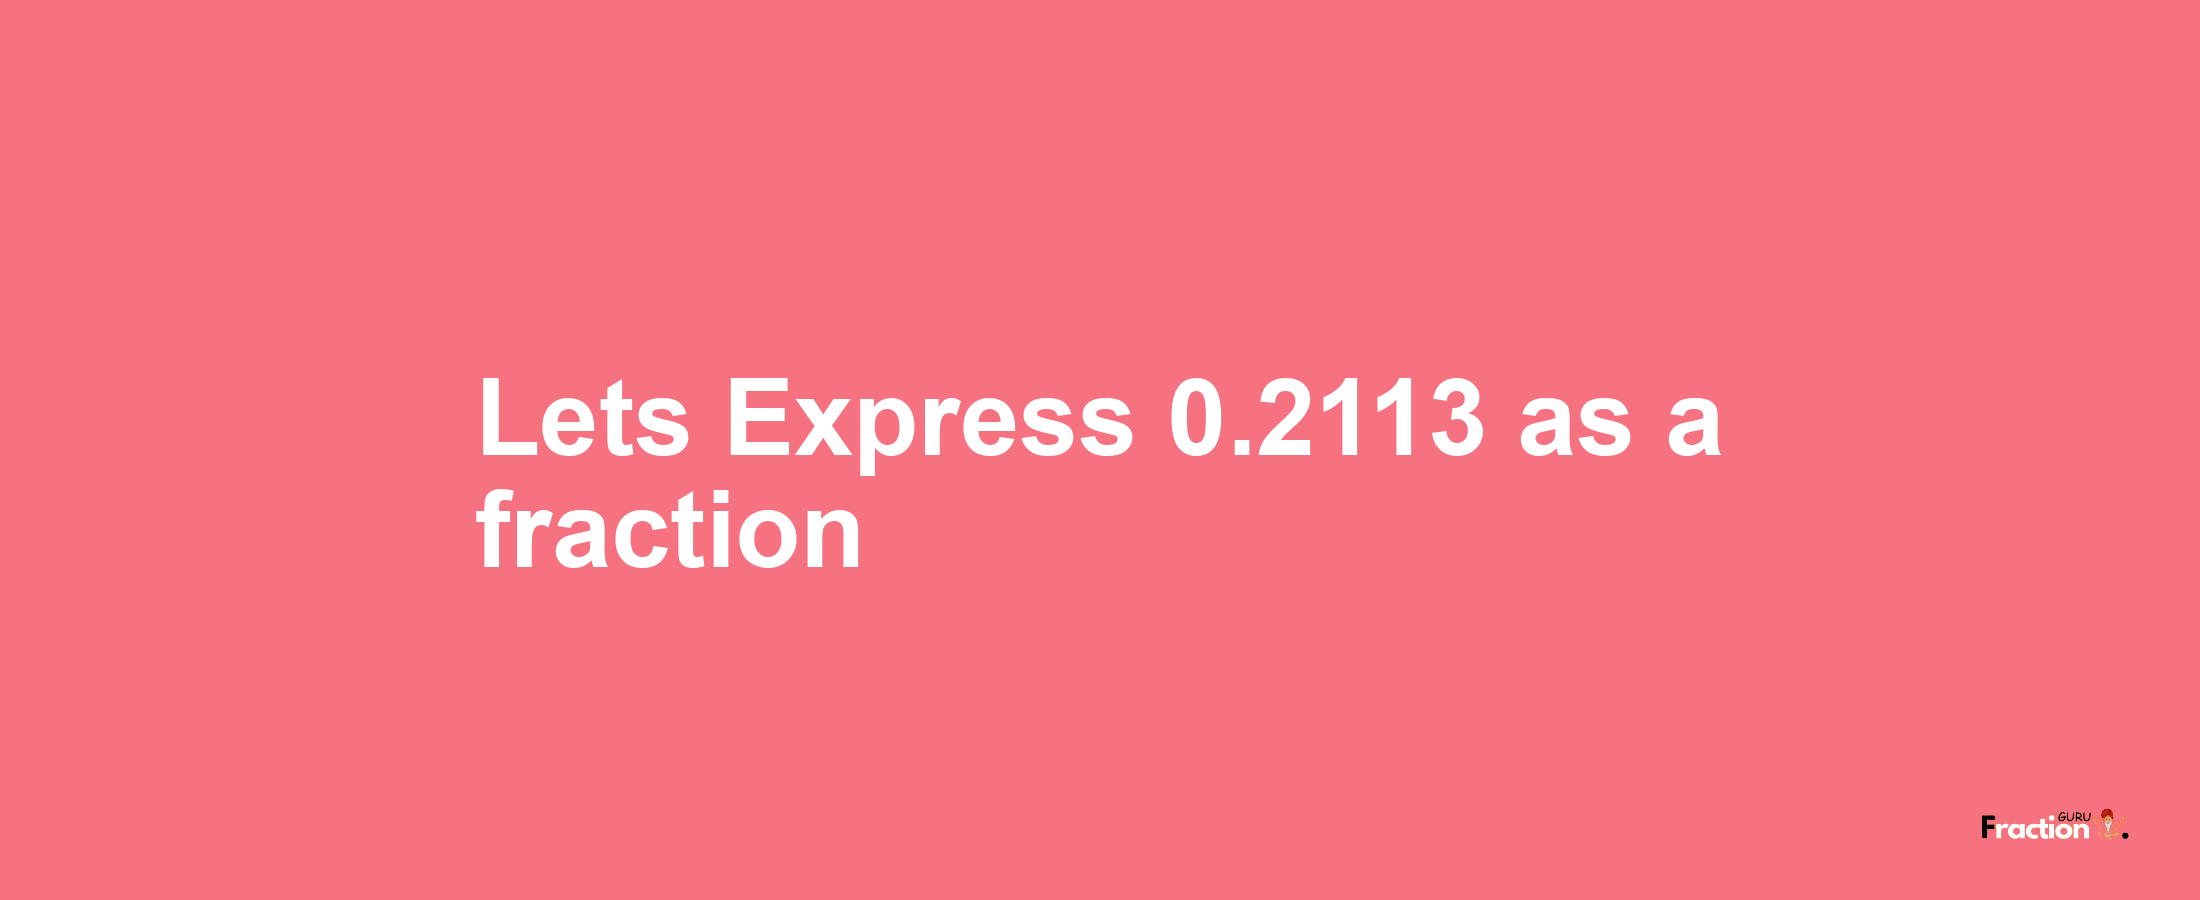 Lets Express 0.2113 as afraction